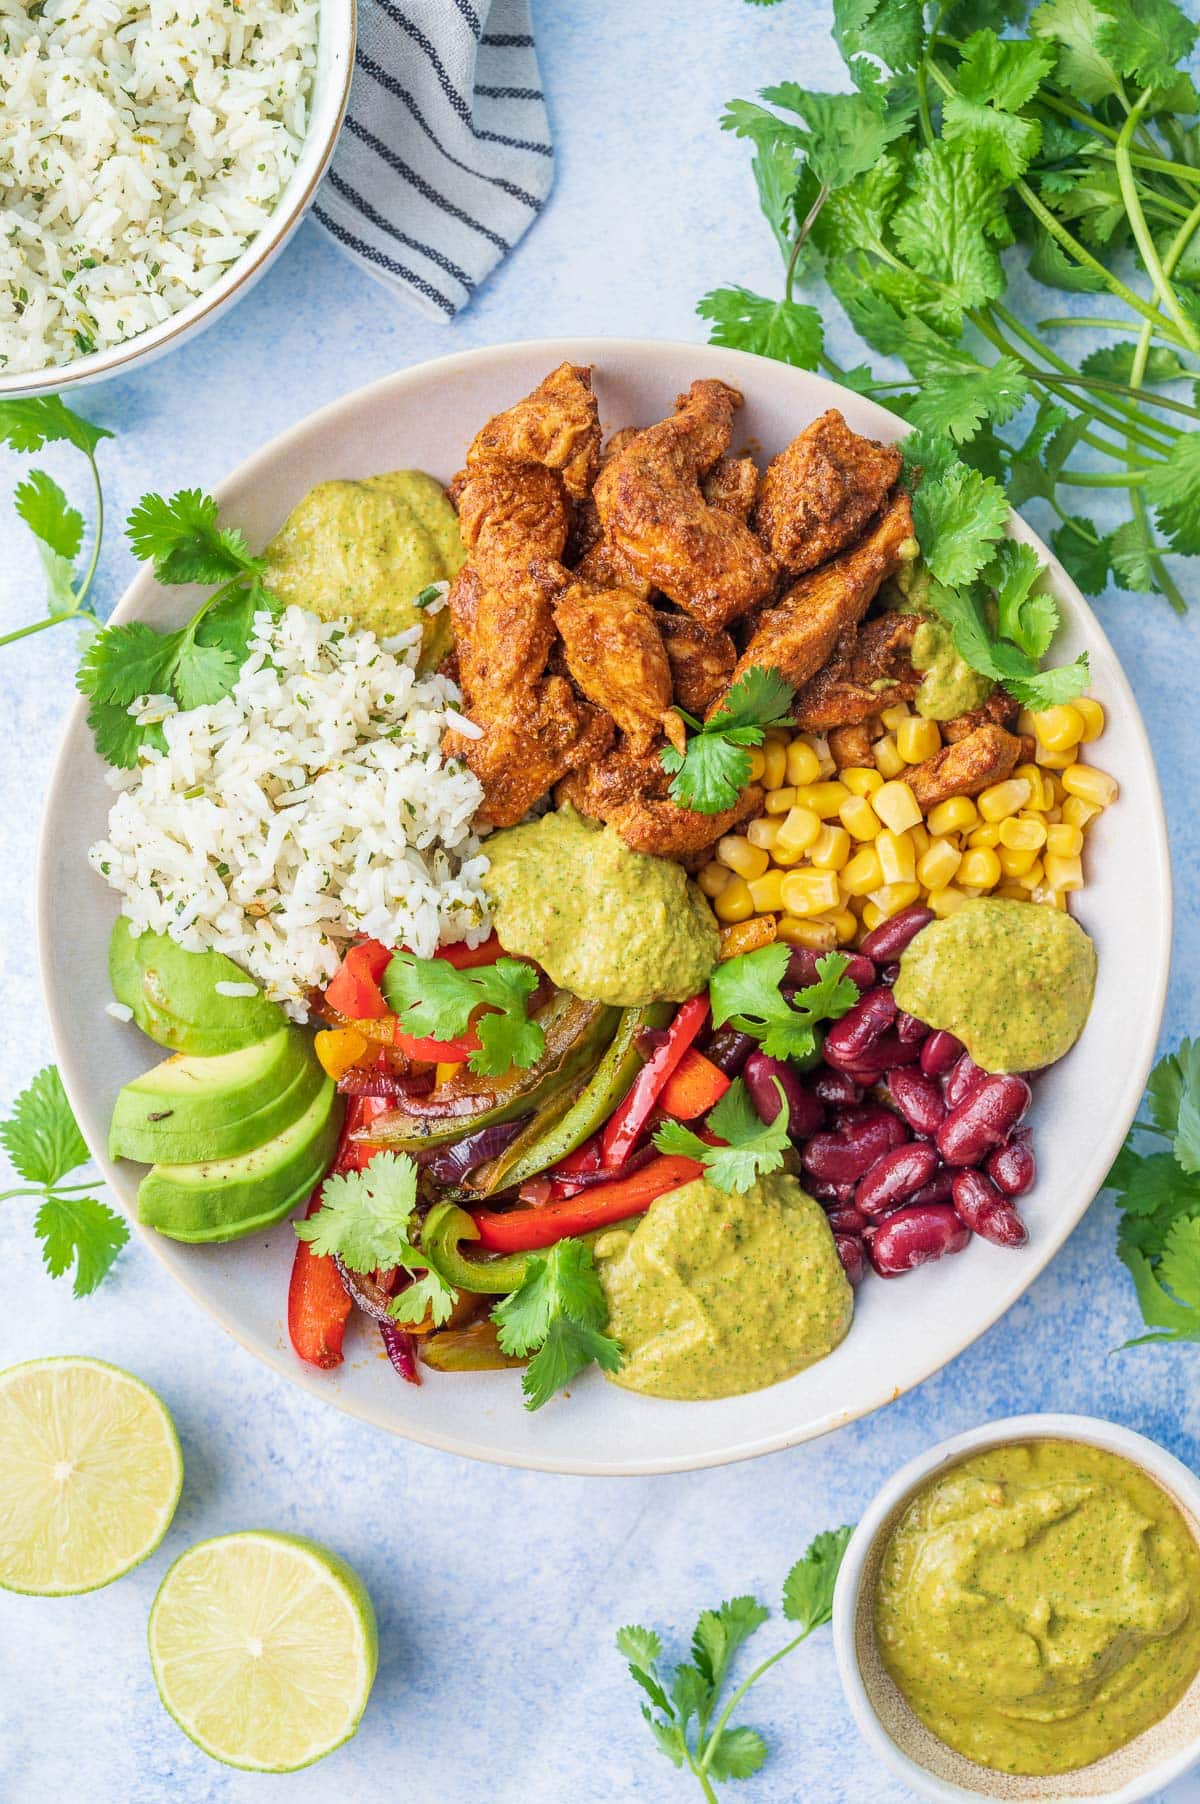 Chicken fajitas with corn, avocado, beans, cilantro lime rice, and sauce in a beige bowl.